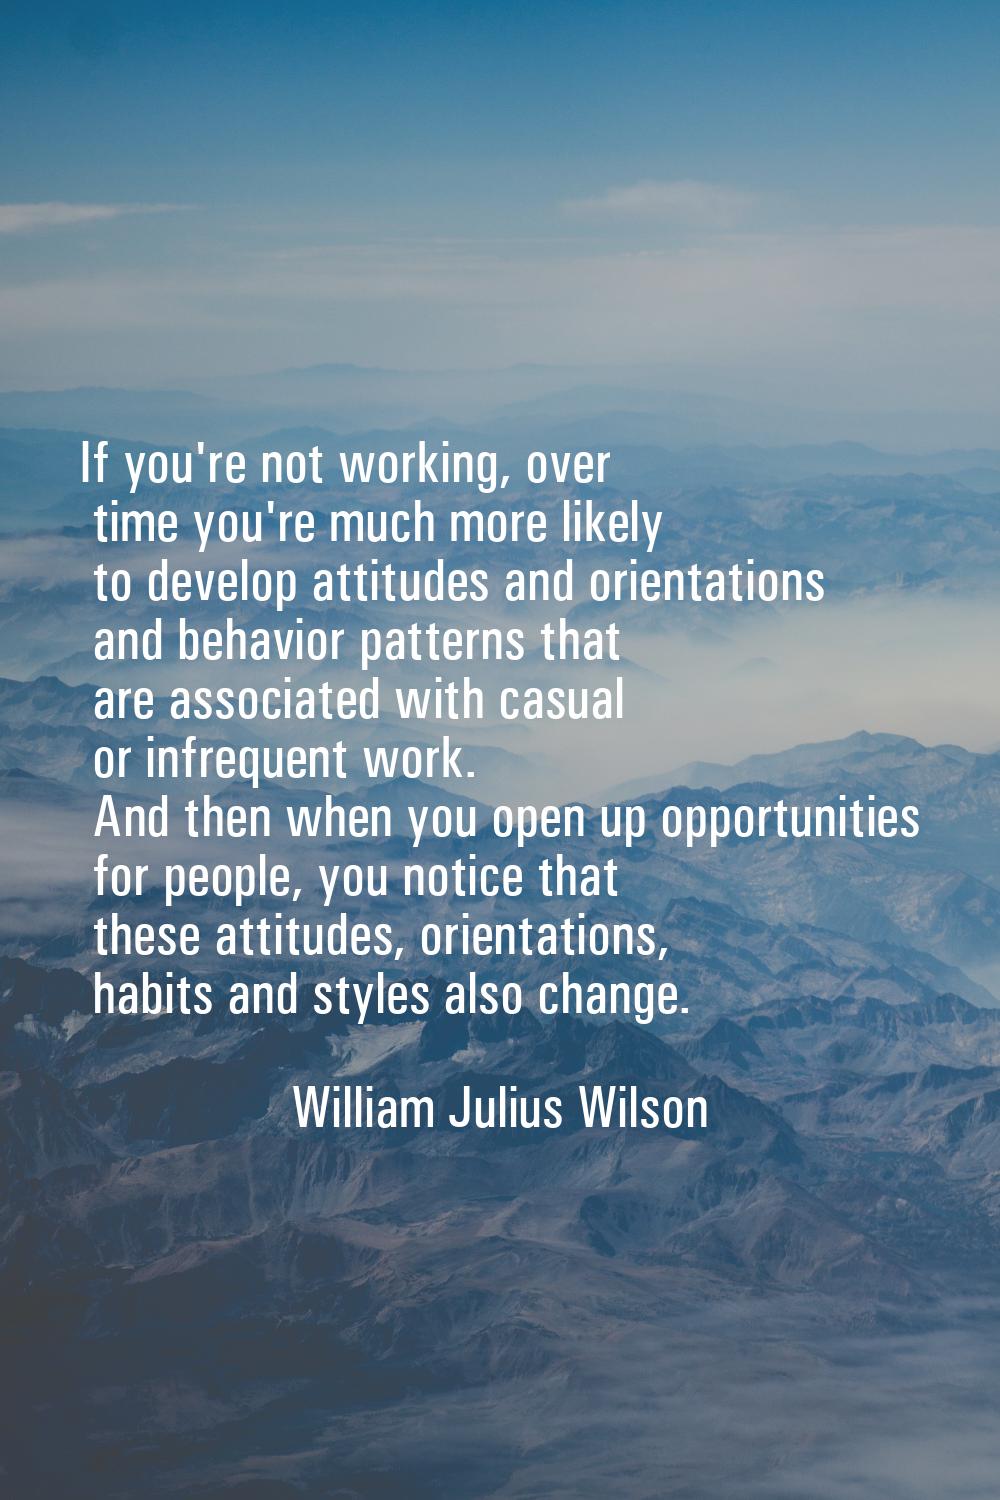 If you're not working, over time you're much more likely to develop attitudes and orientations and 